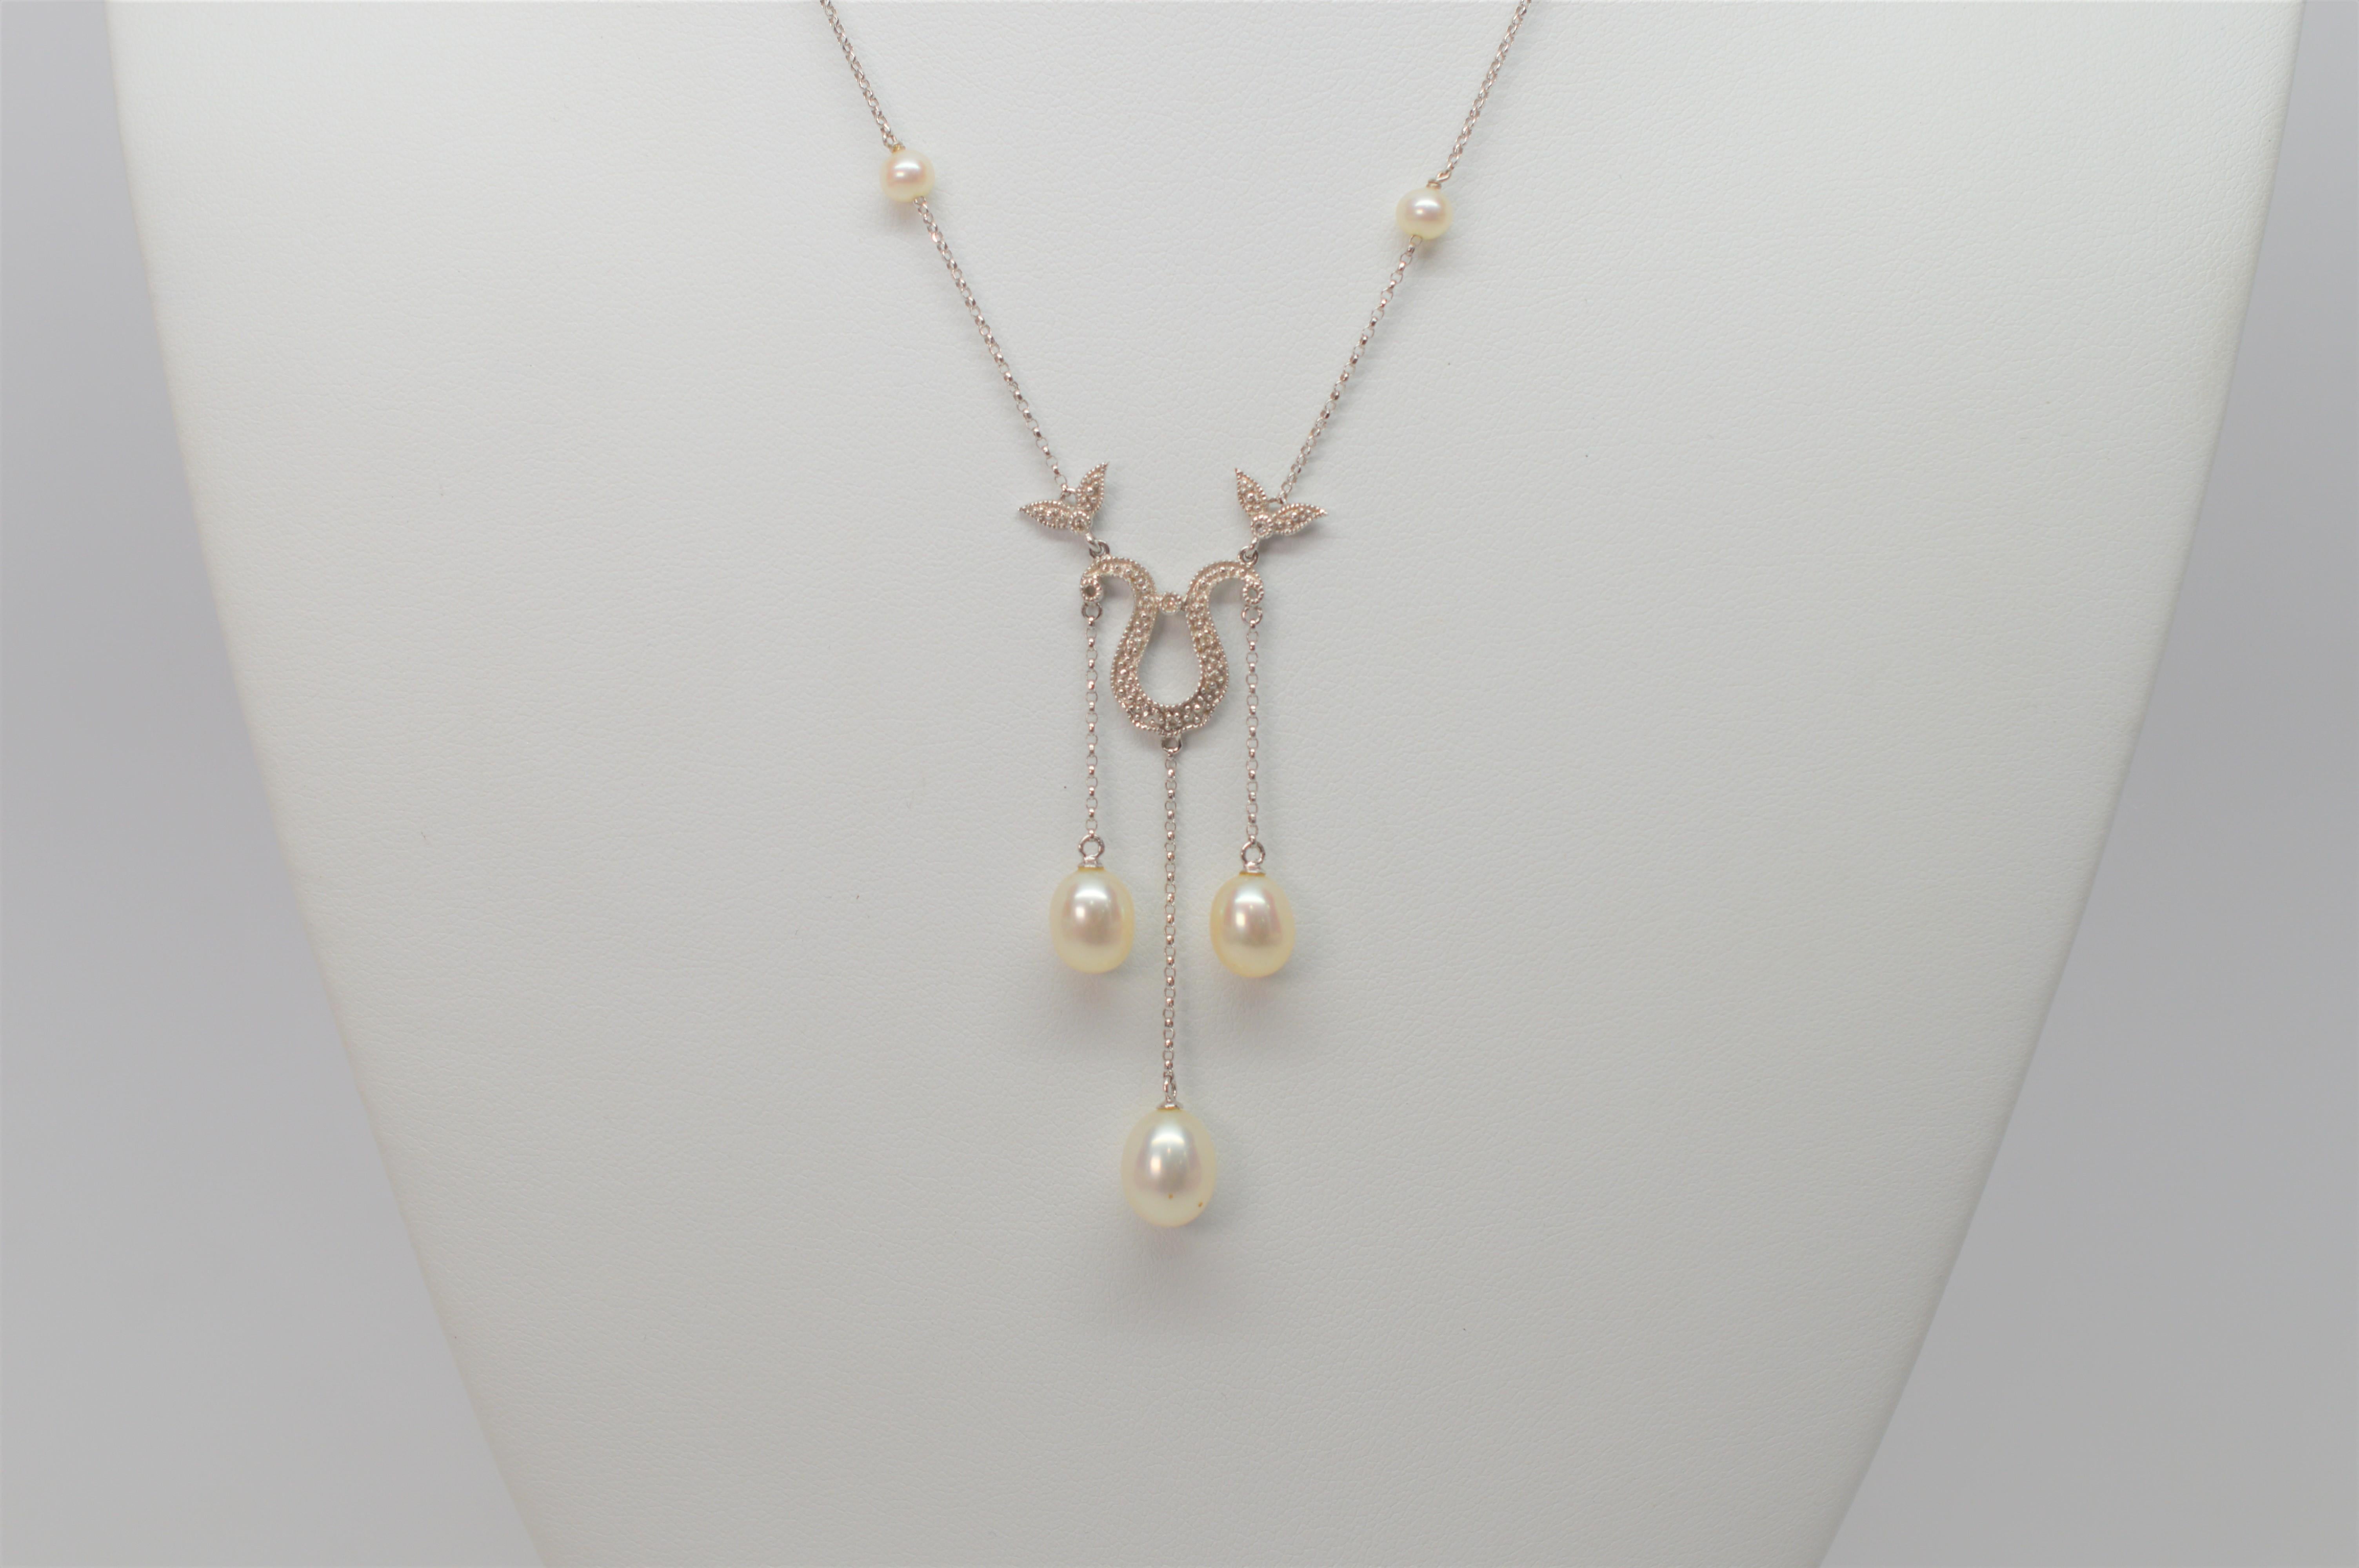 White Gold and Pearl Teardrop Pendant Necklace with Diamond Enhancements 1